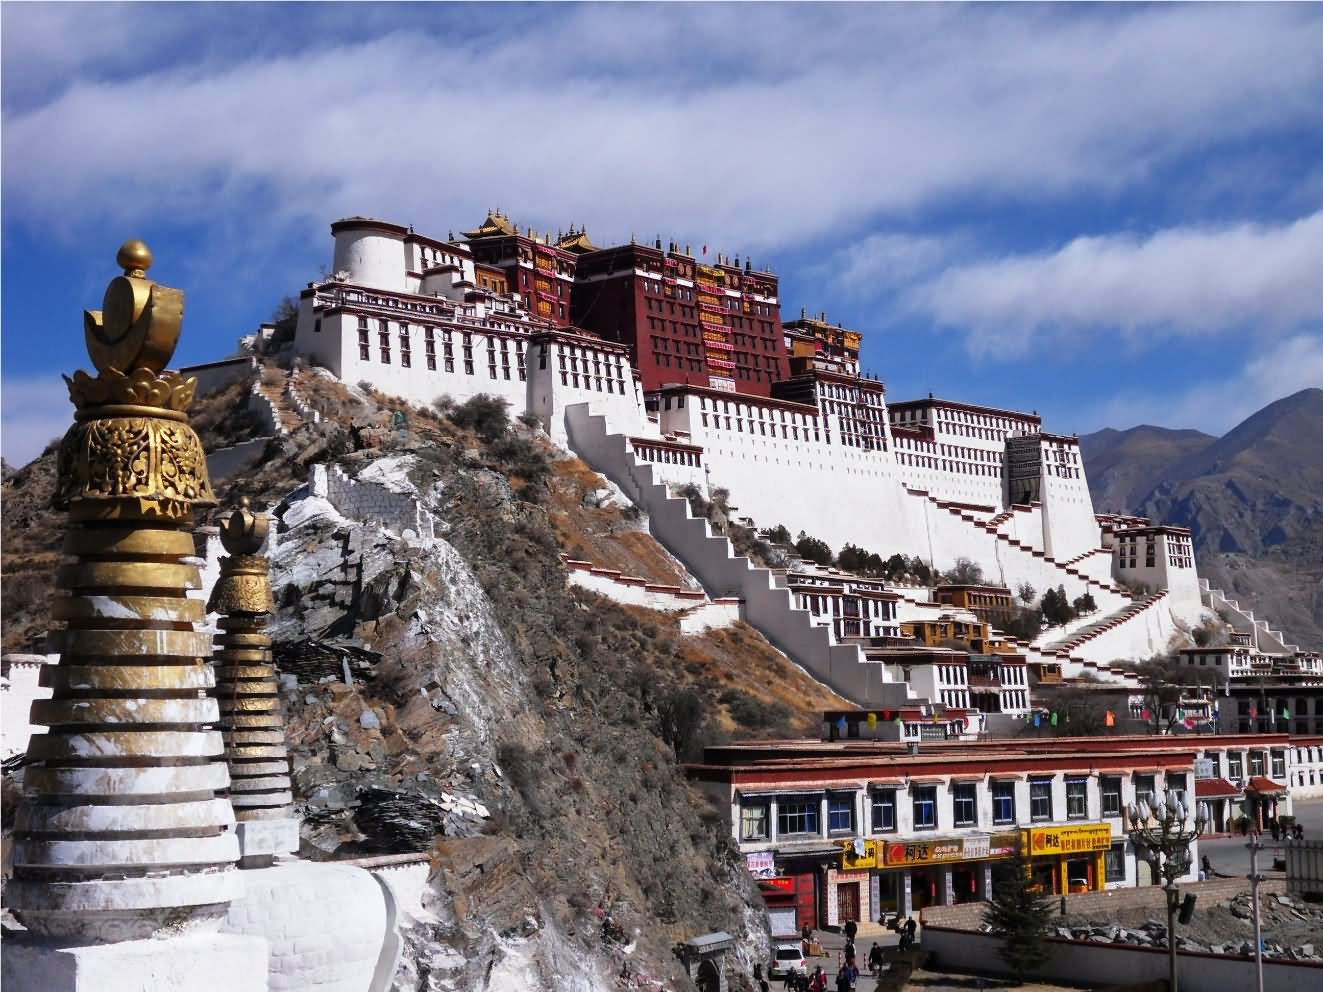 The Potala Palace On The Red Hill In Lhasa